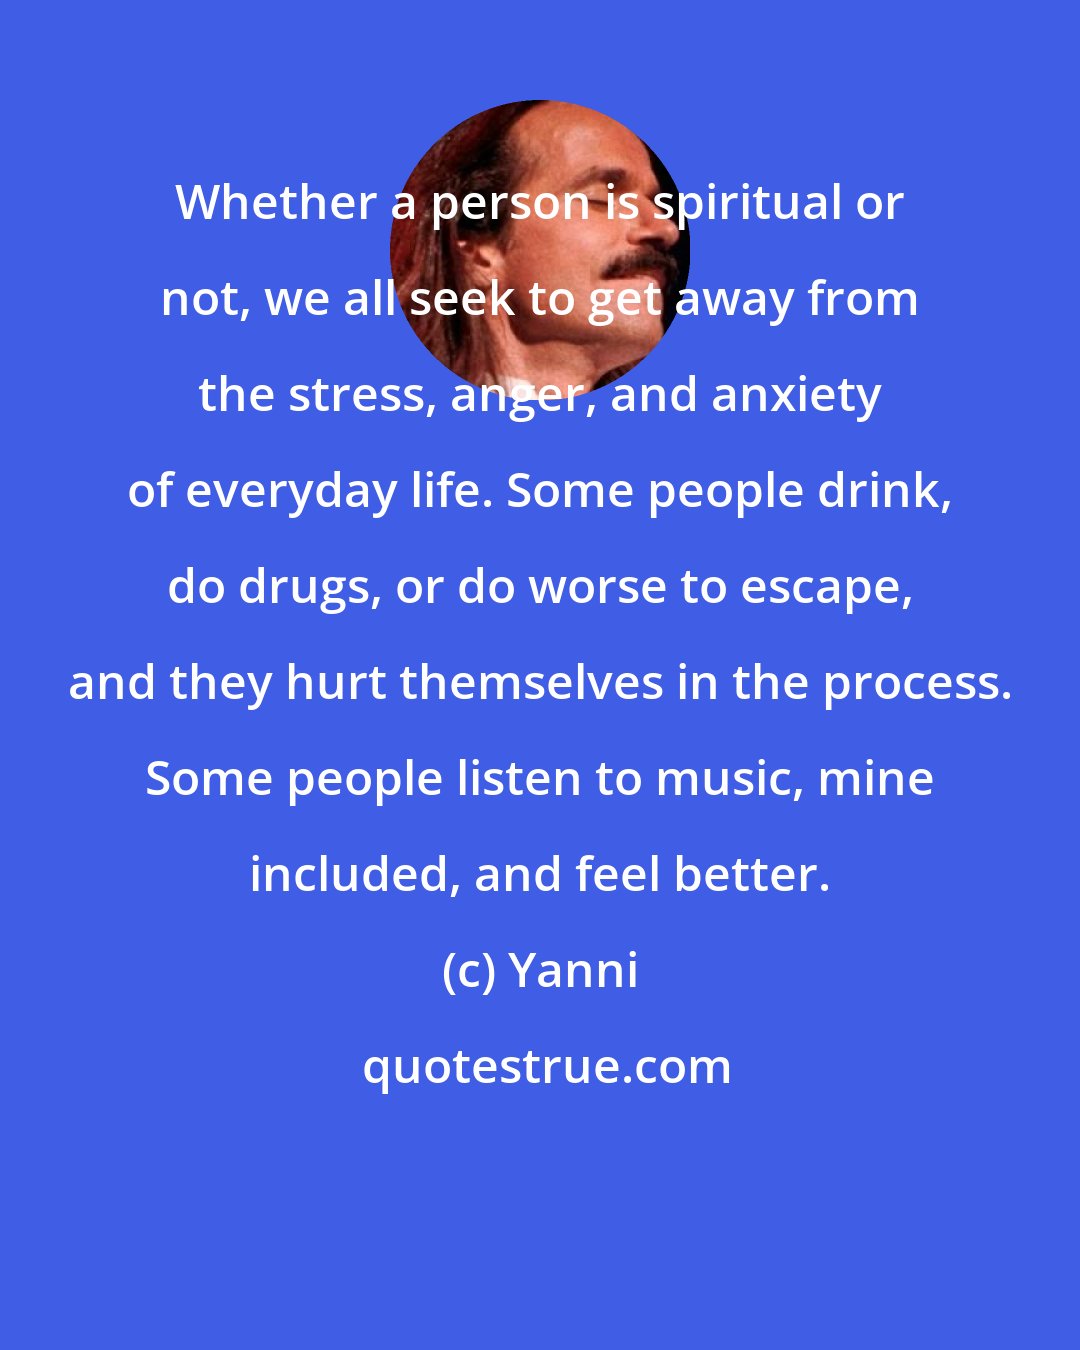 Yanni: Whether a person is spiritual or not, we all seek to get away from the stress, anger, and anxiety of everyday life. Some people drink, do drugs, or do worse to escape, and they hurt themselves in the process. Some people listen to music, mine included, and feel better.